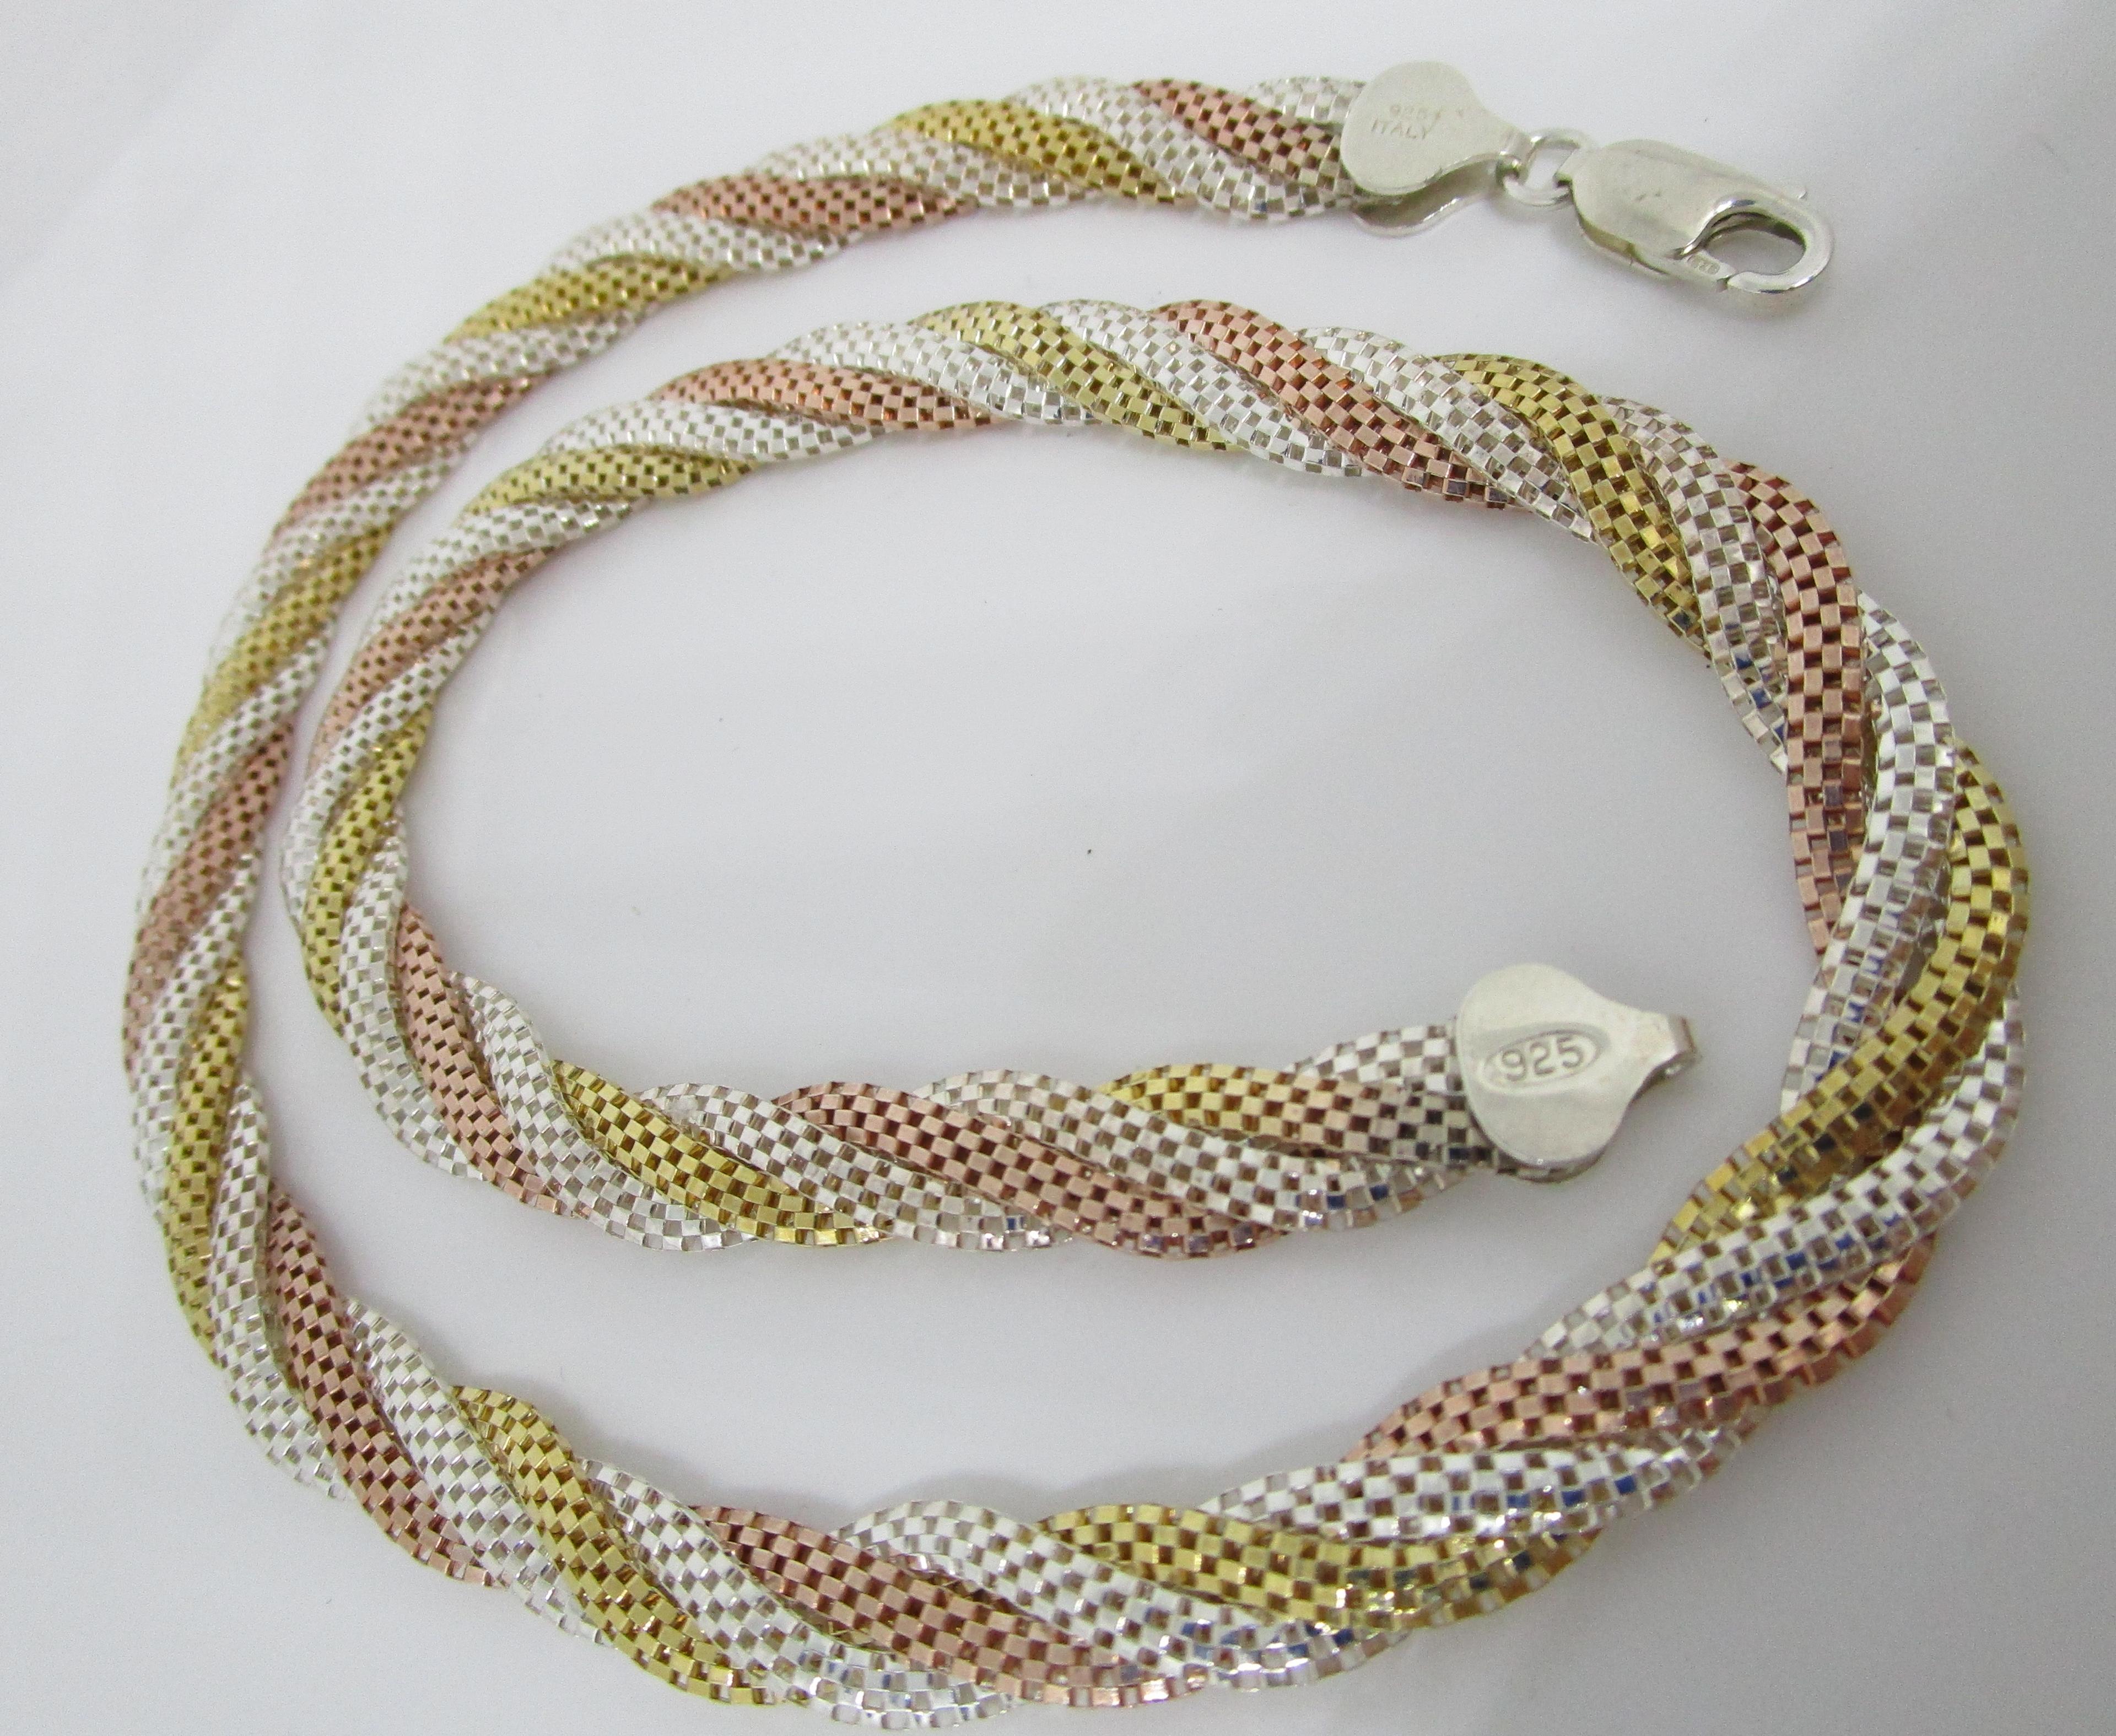 TRICOLOR NECKLACE GOLD ON STERLING SILVER CHAIN